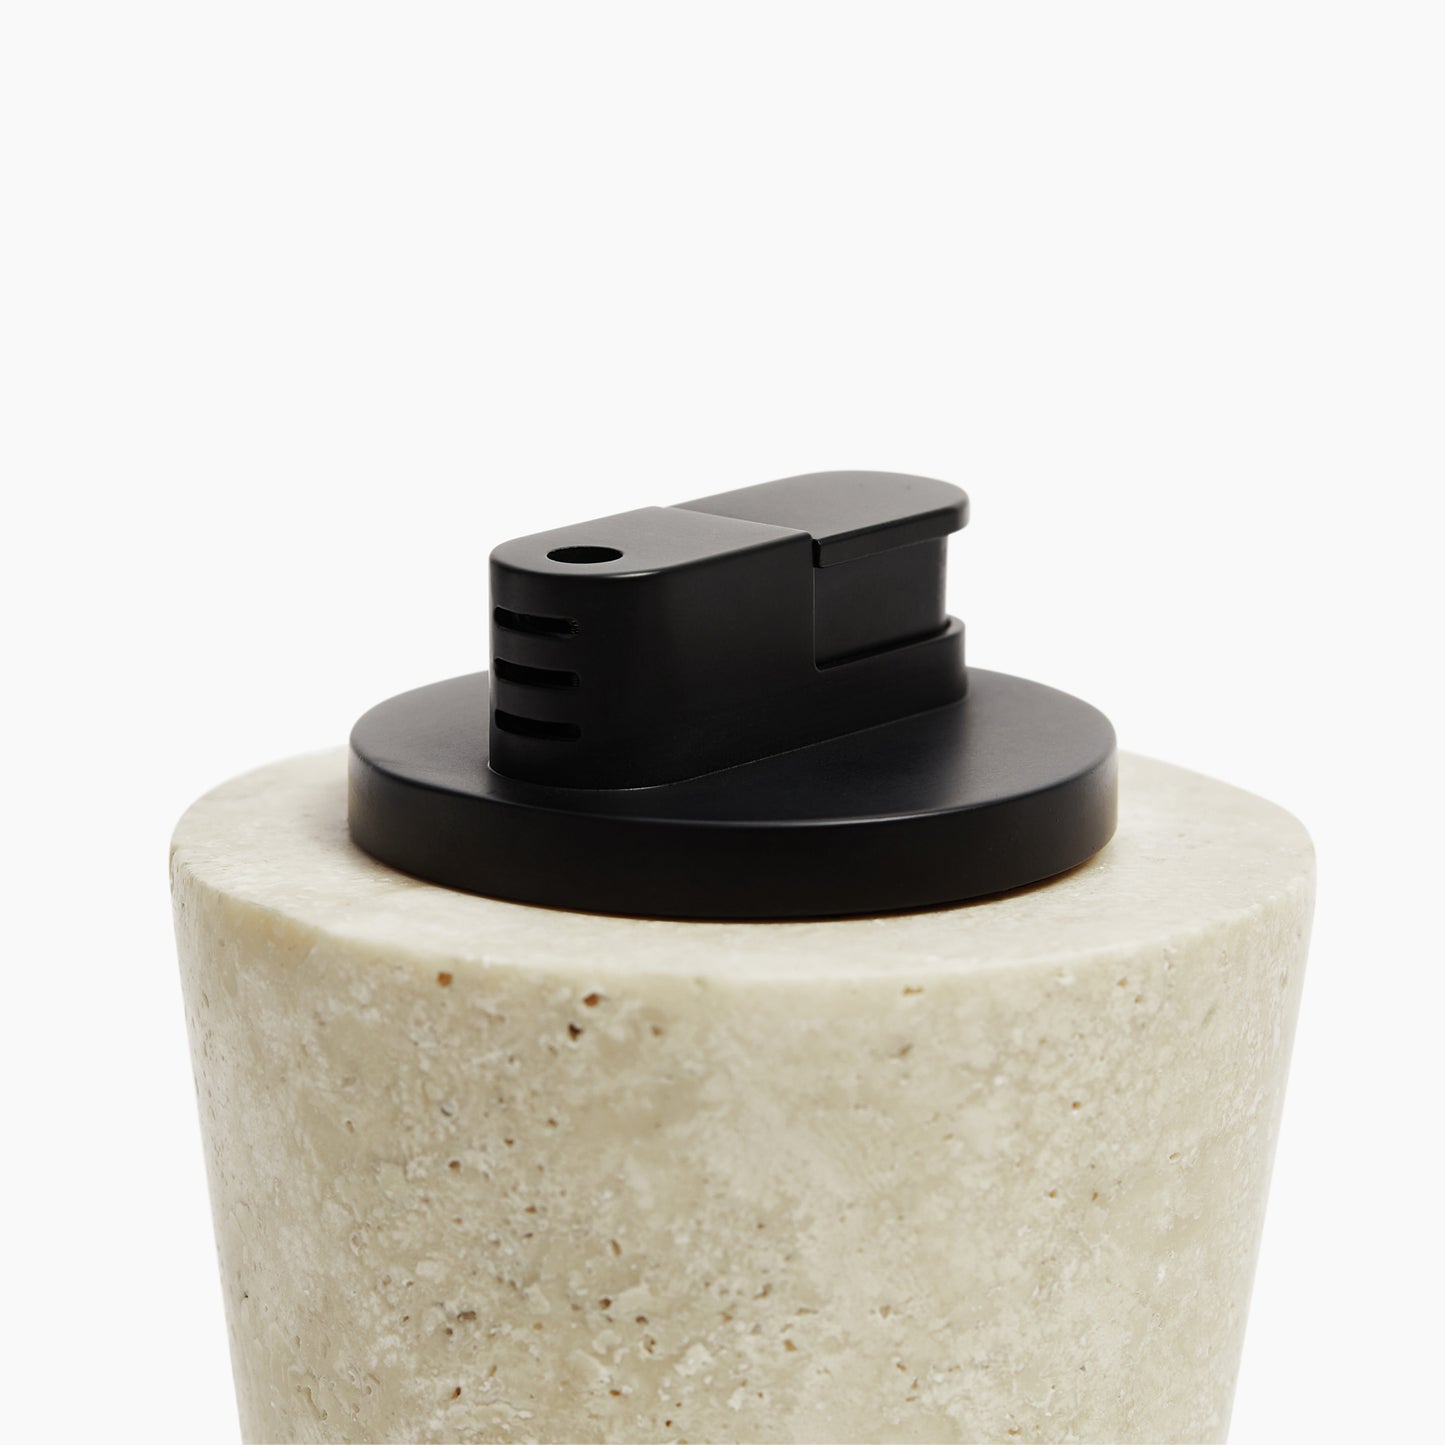 TABLE LIGHTER IN IVORY NAVONA TRAVERTINE WITH BLACK INSERT